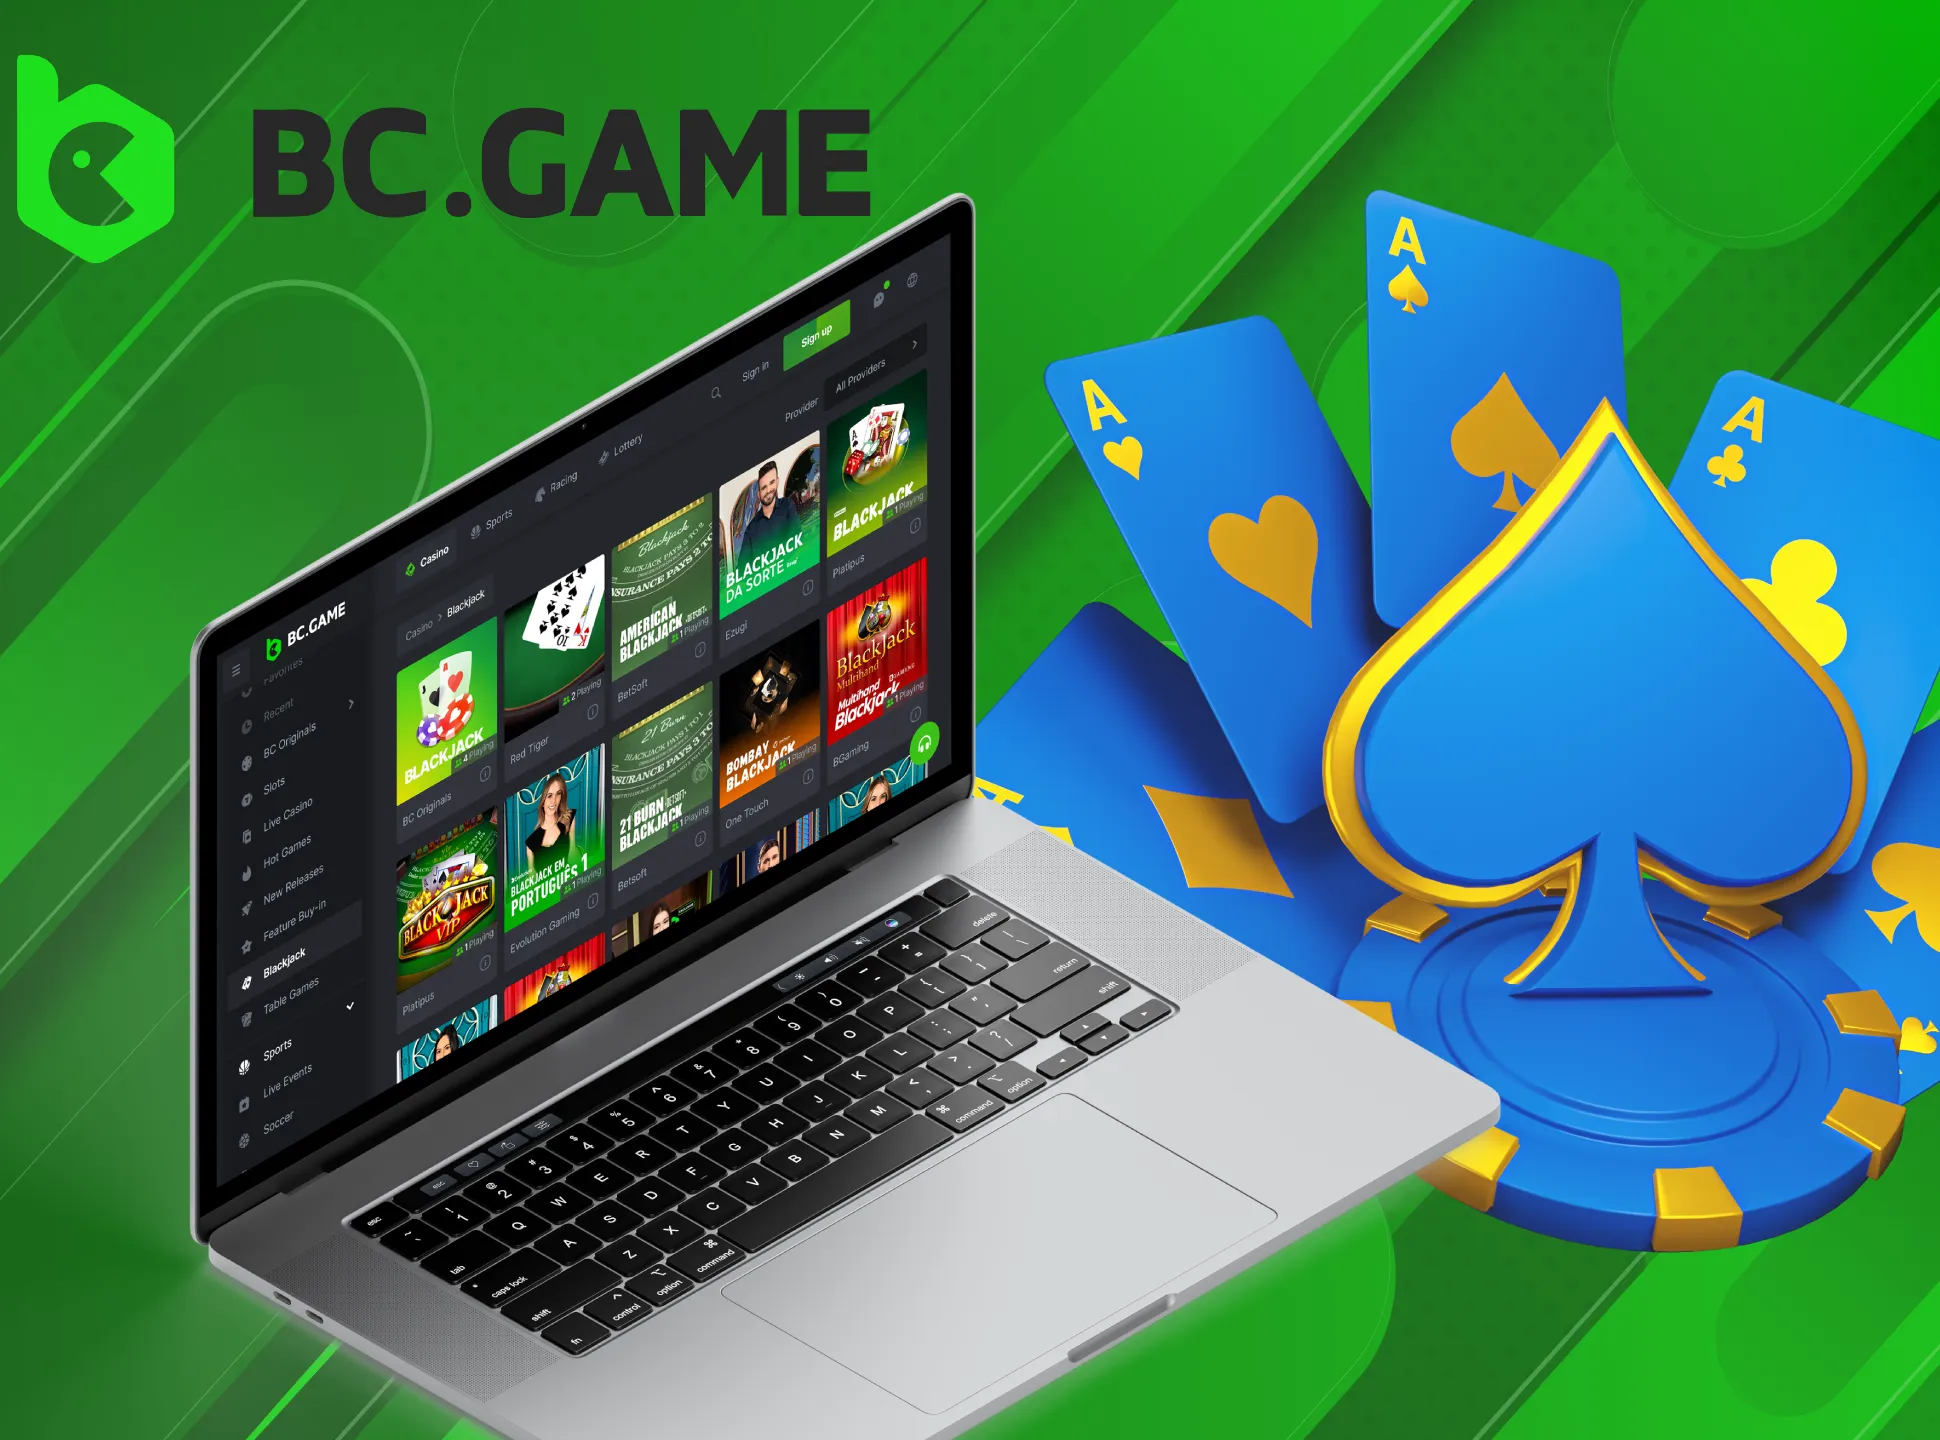 Use your skills to beat the dealer in BC Game's BlackJack game.